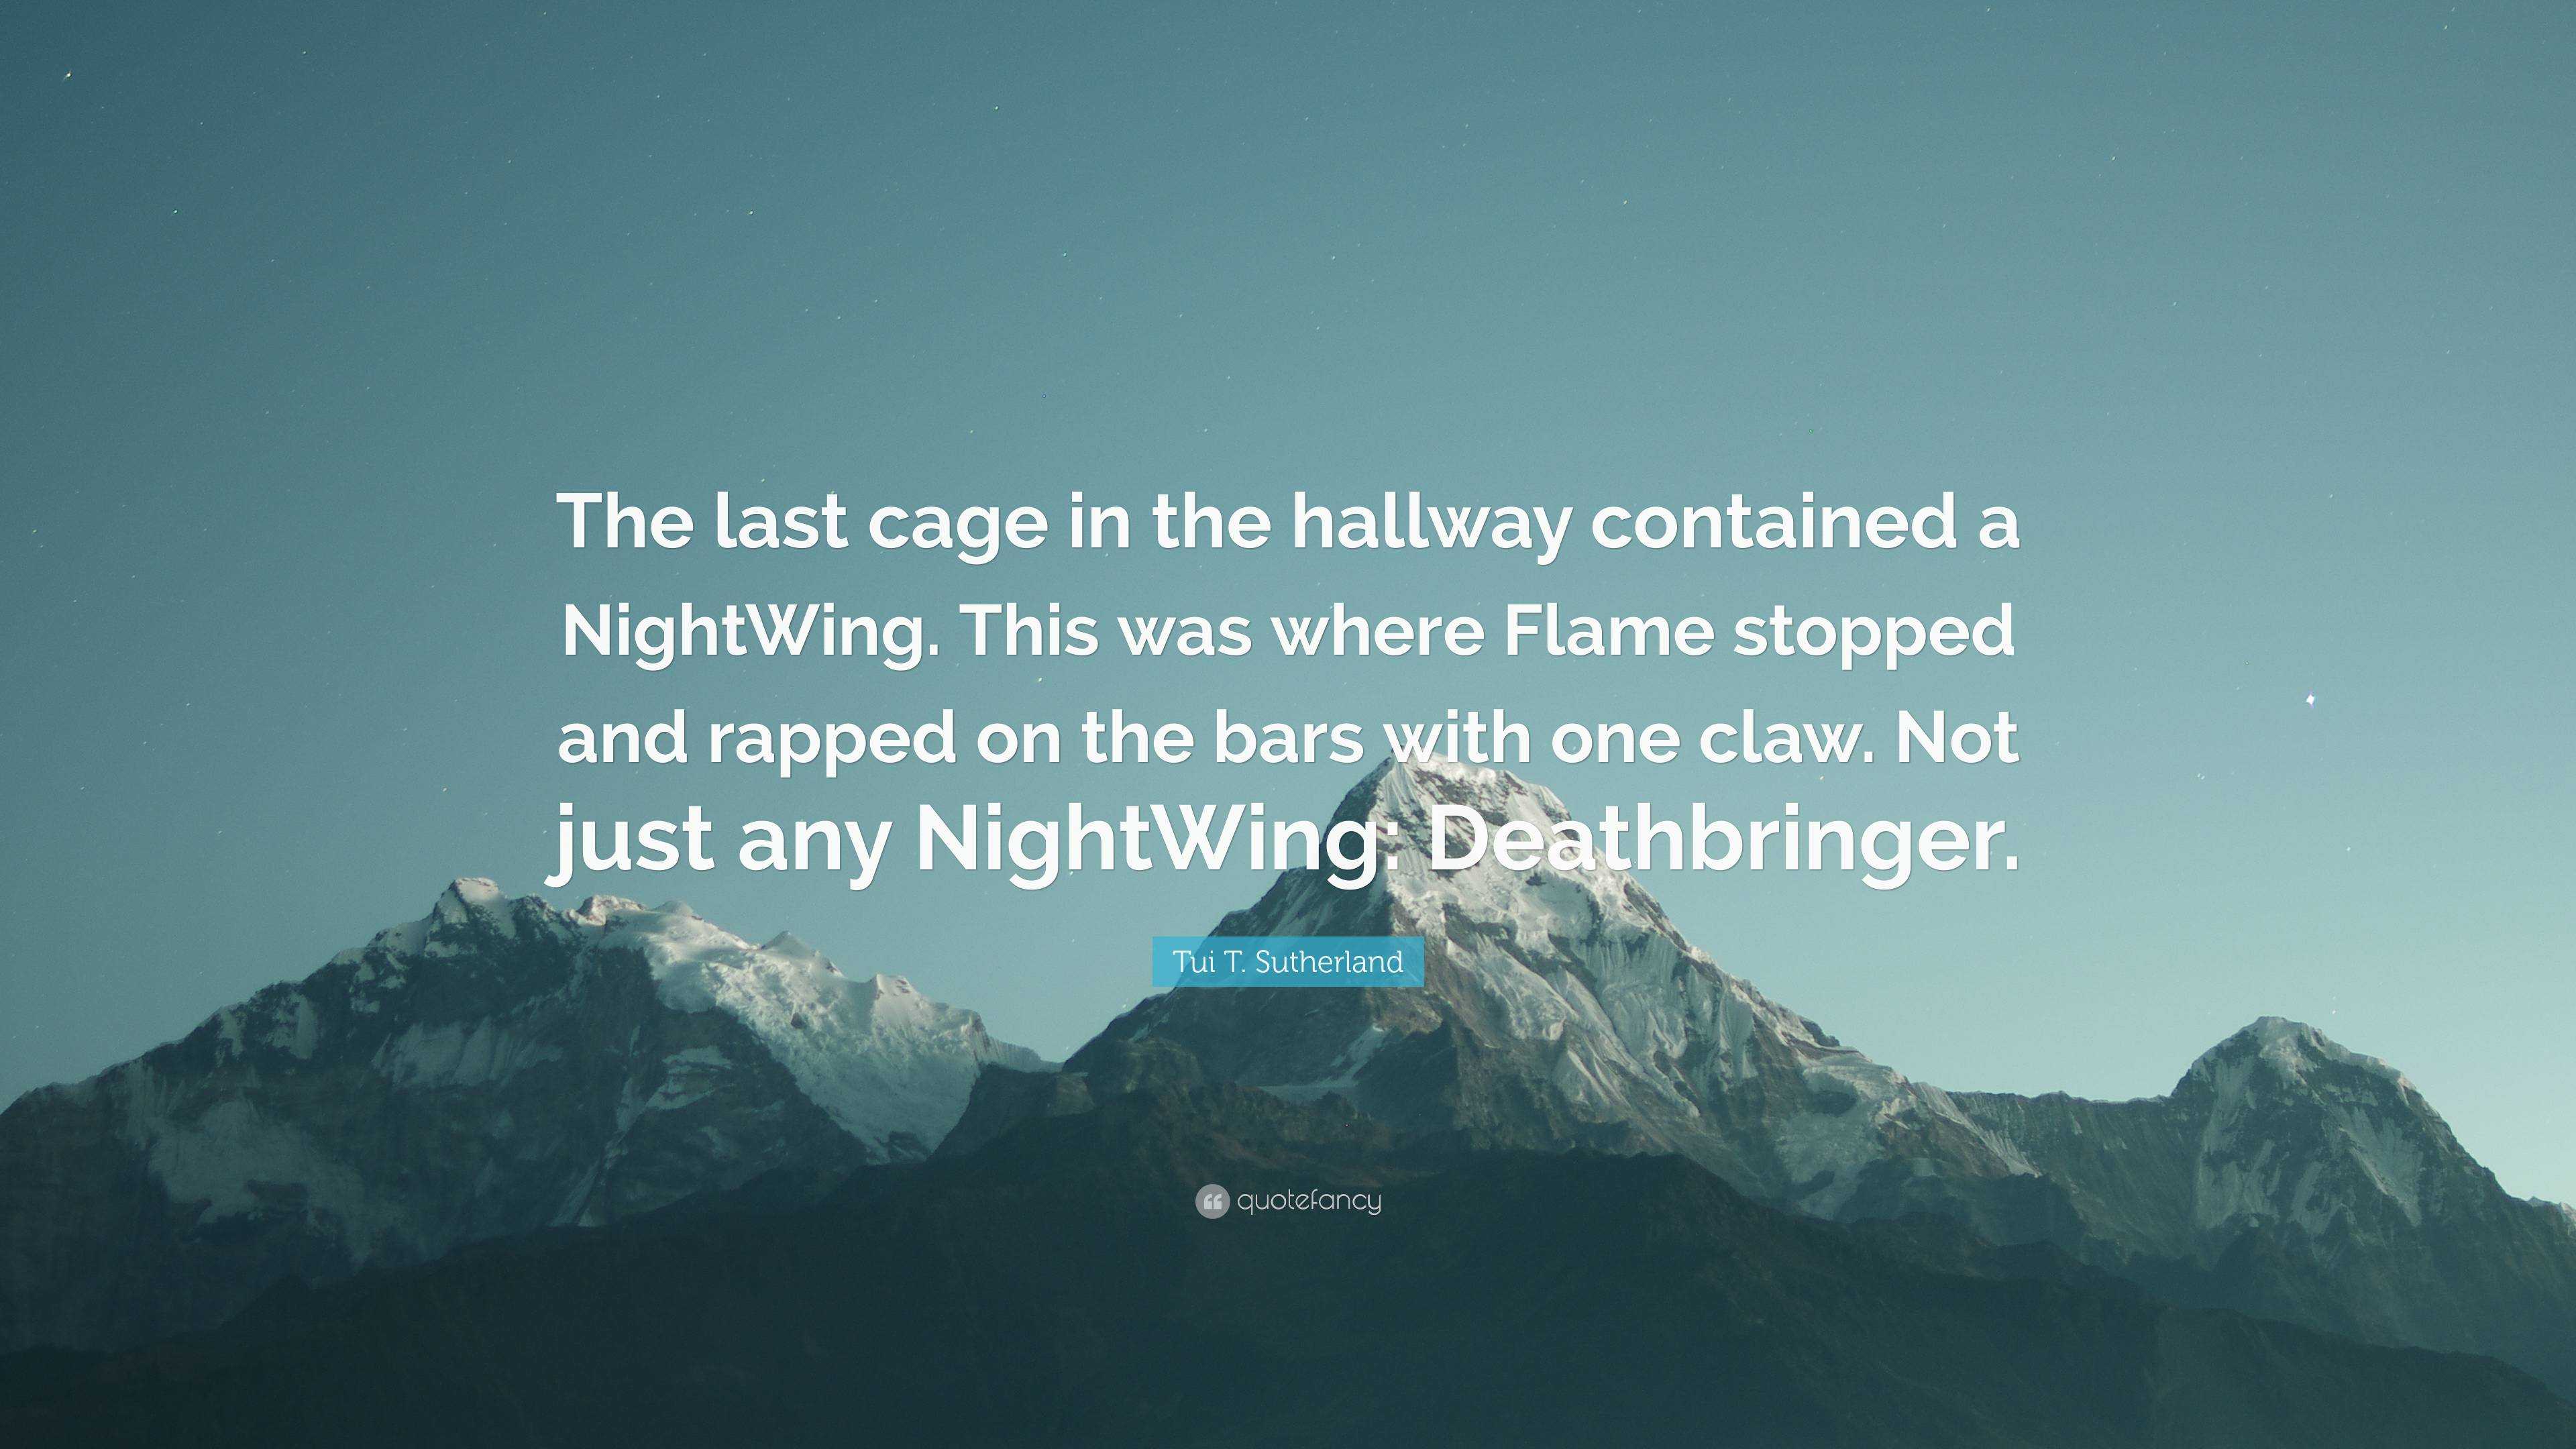 Tui T Sutherland Quote The Last Cage In The Hallway Contained A Nightwing This Was Where Flame Stopped And Rapped On The Bars With One Claw N